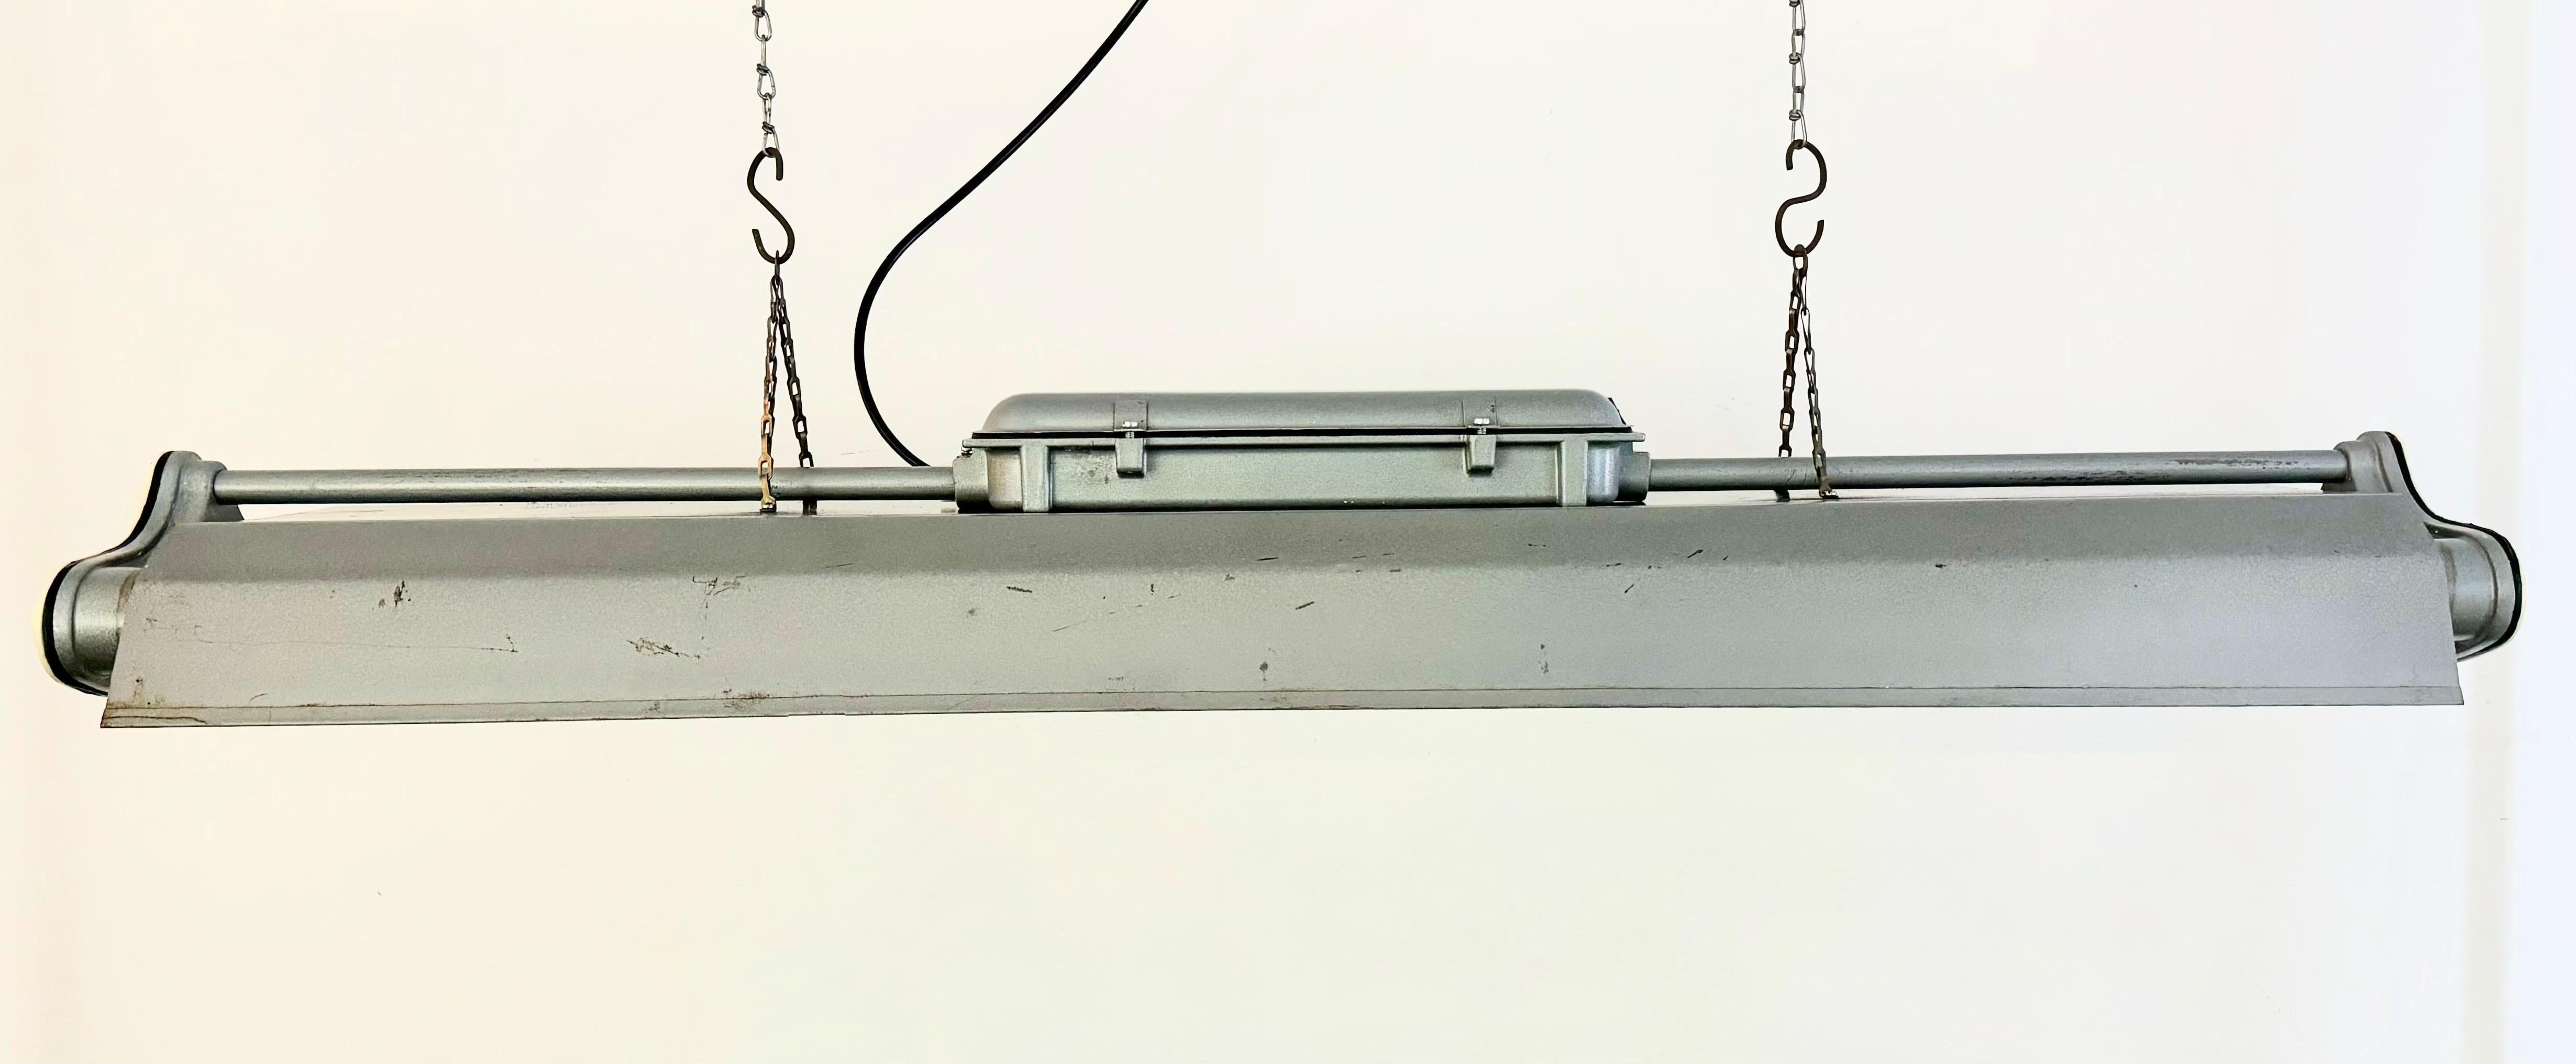 This industrial tube light was made by Polam Gdansk in Poland during the 1970s. It features an aluminium body and iron shade in grey hammerpaint color .The light is converted into three led T8, 120 cm light tubes. The weight of the lamp is 7 kg.